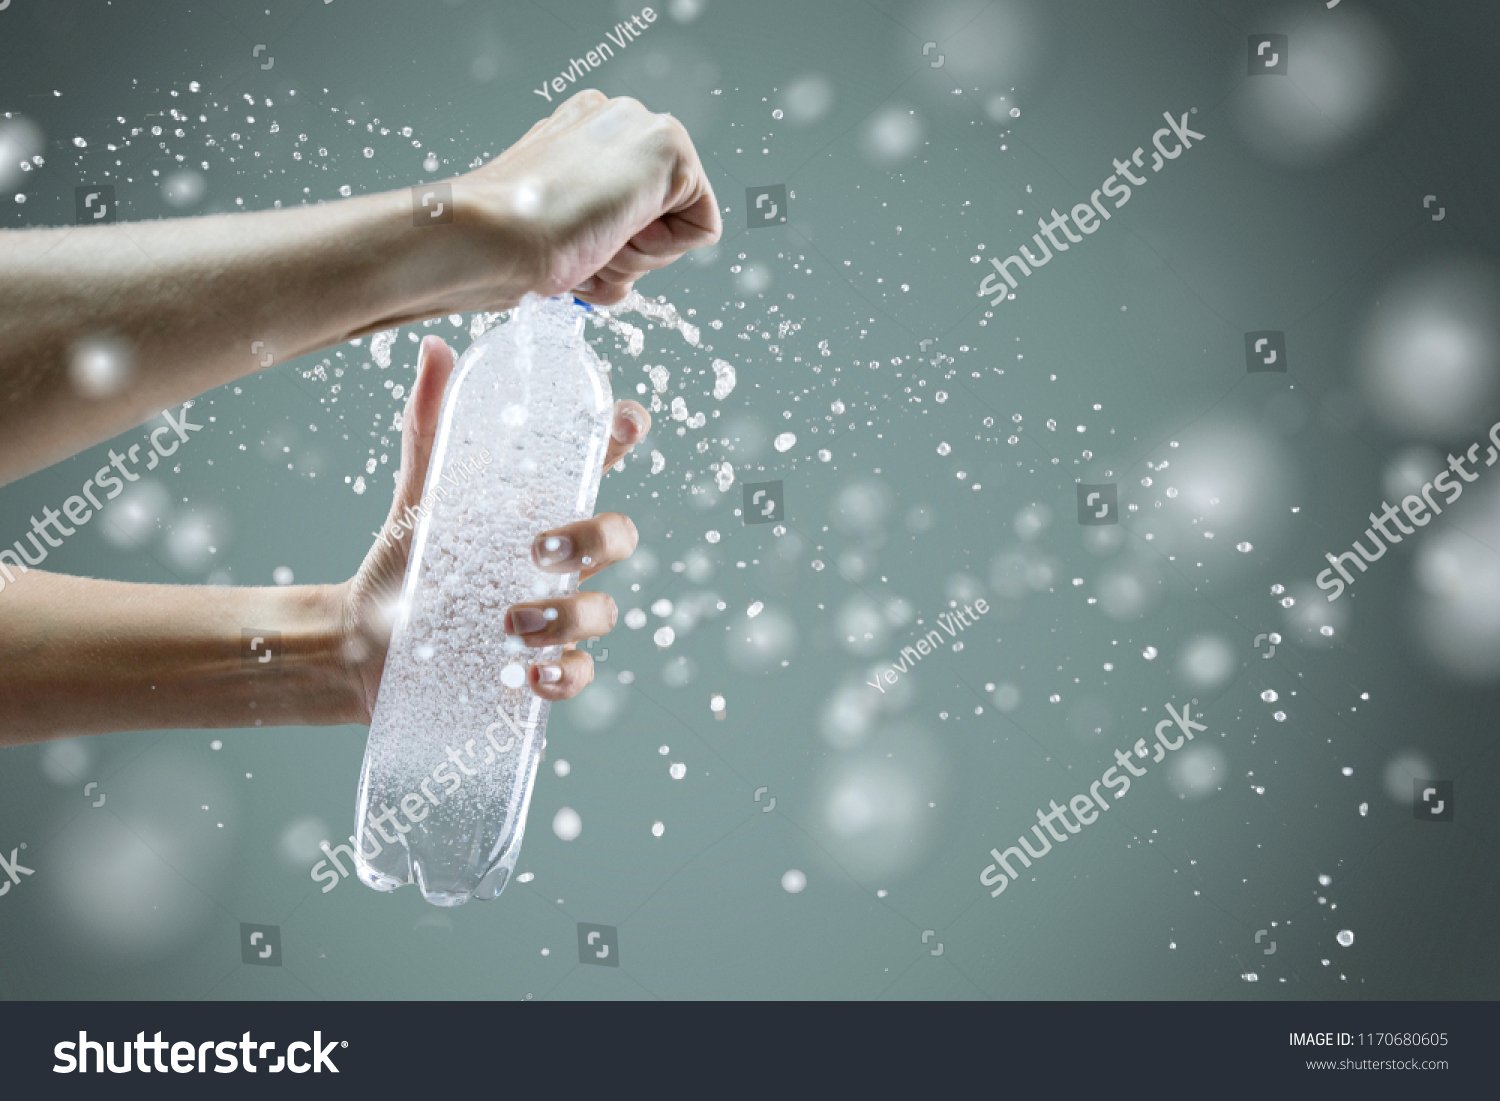 Woman's hand opening a bottle with sparkling water with splashes and lot of drops on gray background. Studio photo shooting. Concept of health lifestyle #1170680605